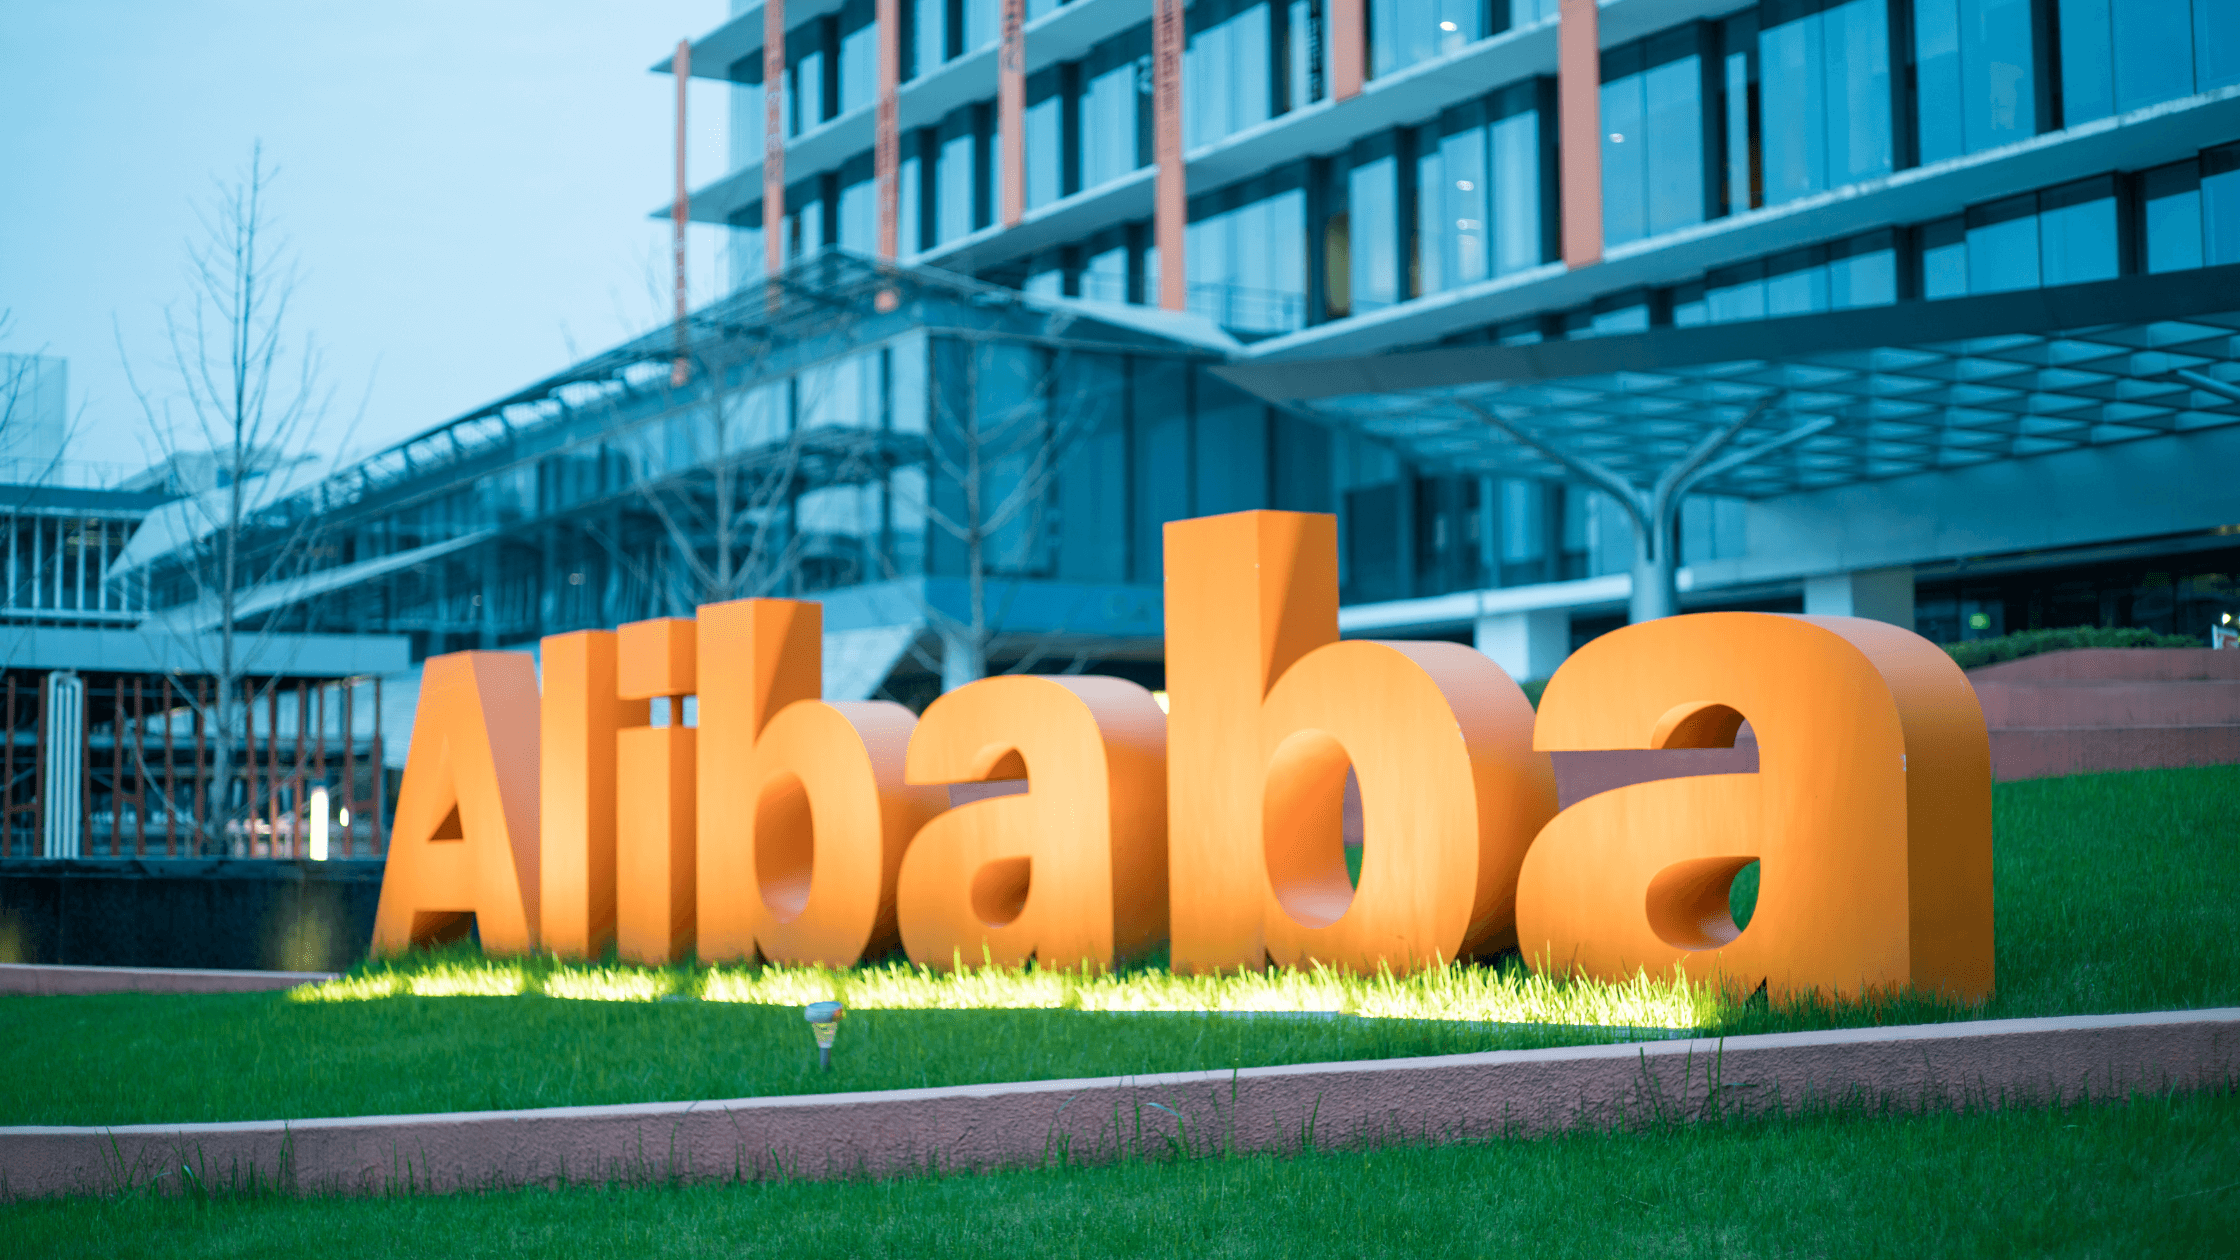 Uncover - Alibaba shares buy